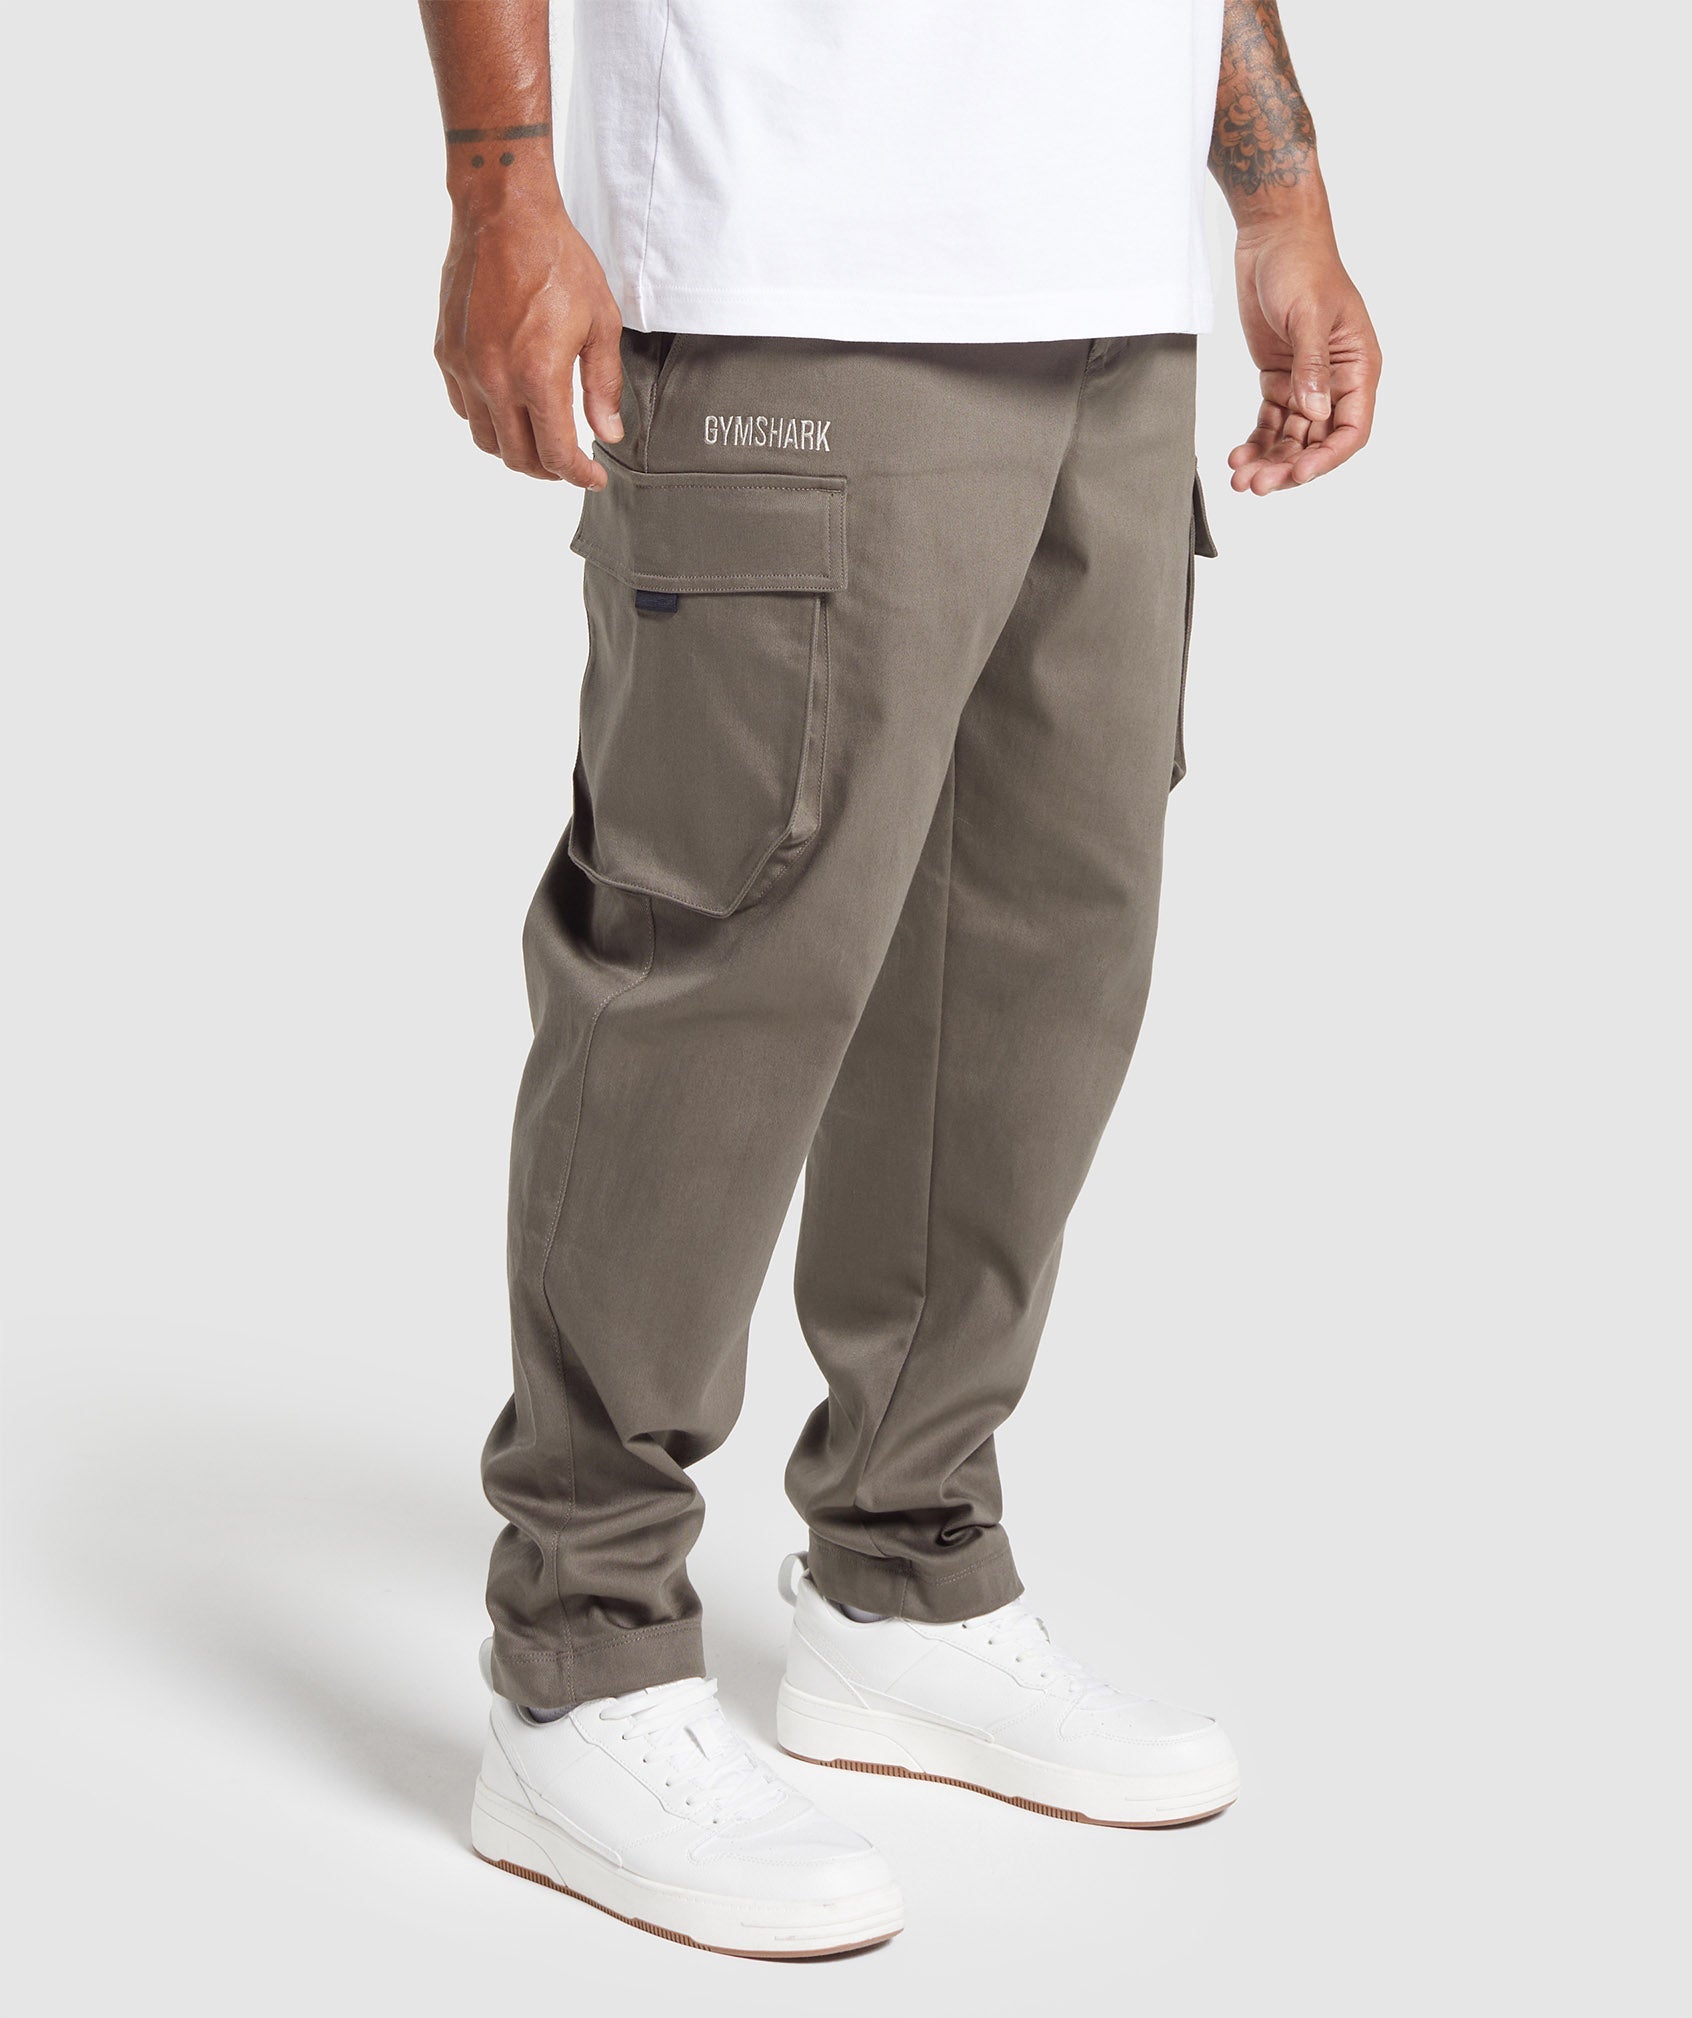 Rest Day Woven Cargo Pants in Camo Brown - view 1